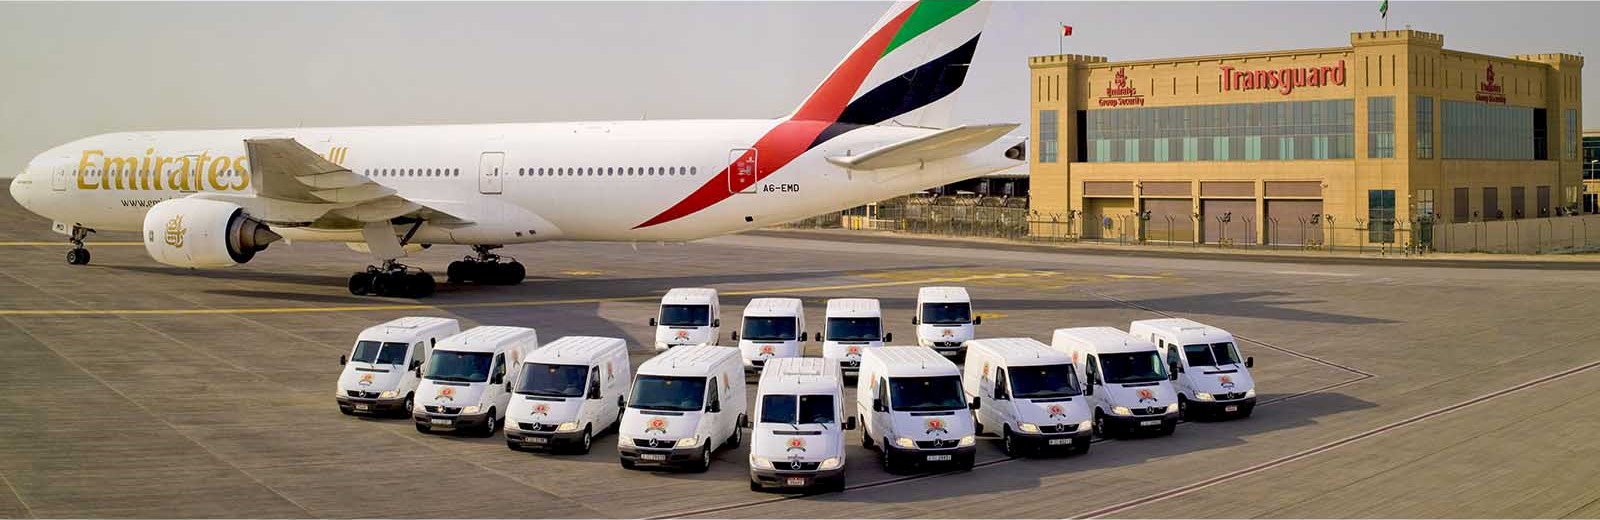 Transguard is spreading its wings in the UAE vans on airport tarmac middle east Emirates plane